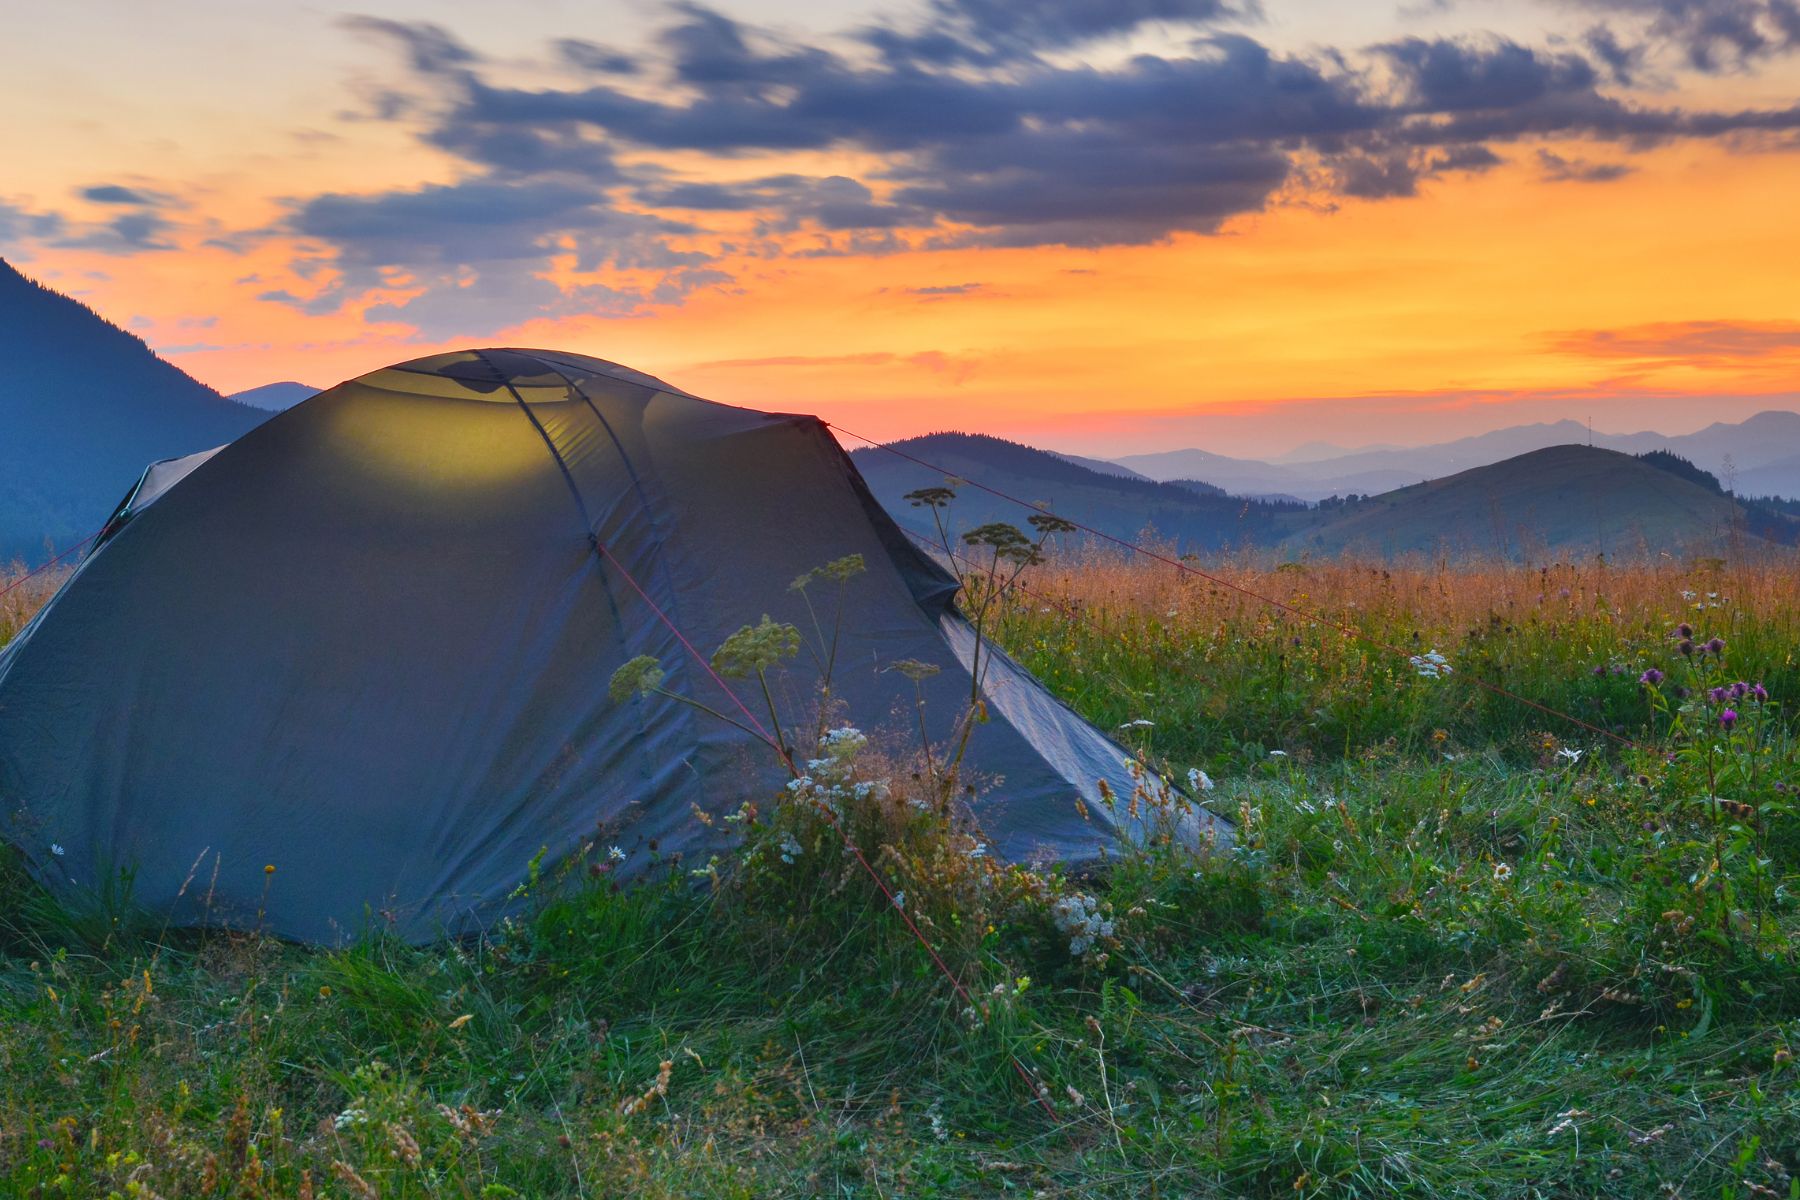 Camping on the Blue Ridge Parkway